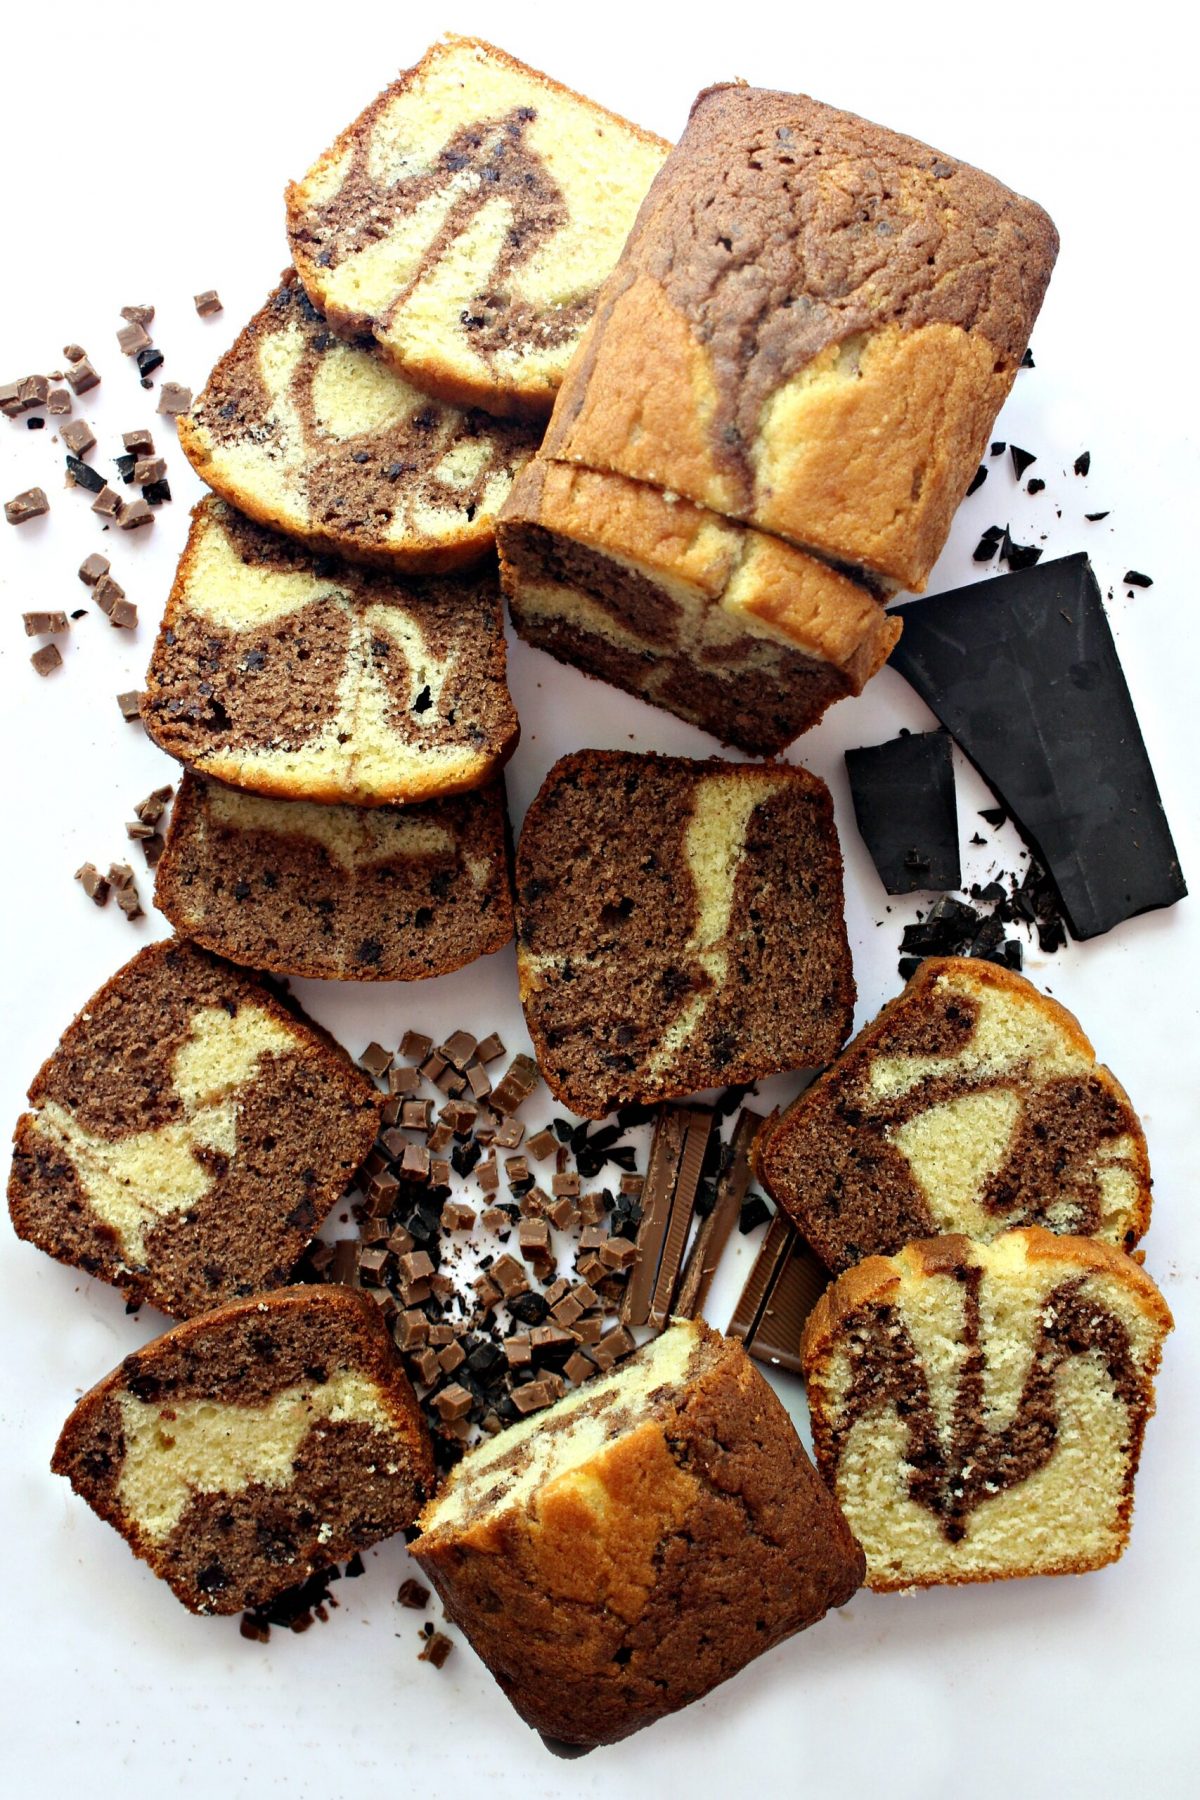 Chocolate Marble Pound cake, with caramel and chocolate swirls, cut into slices.  